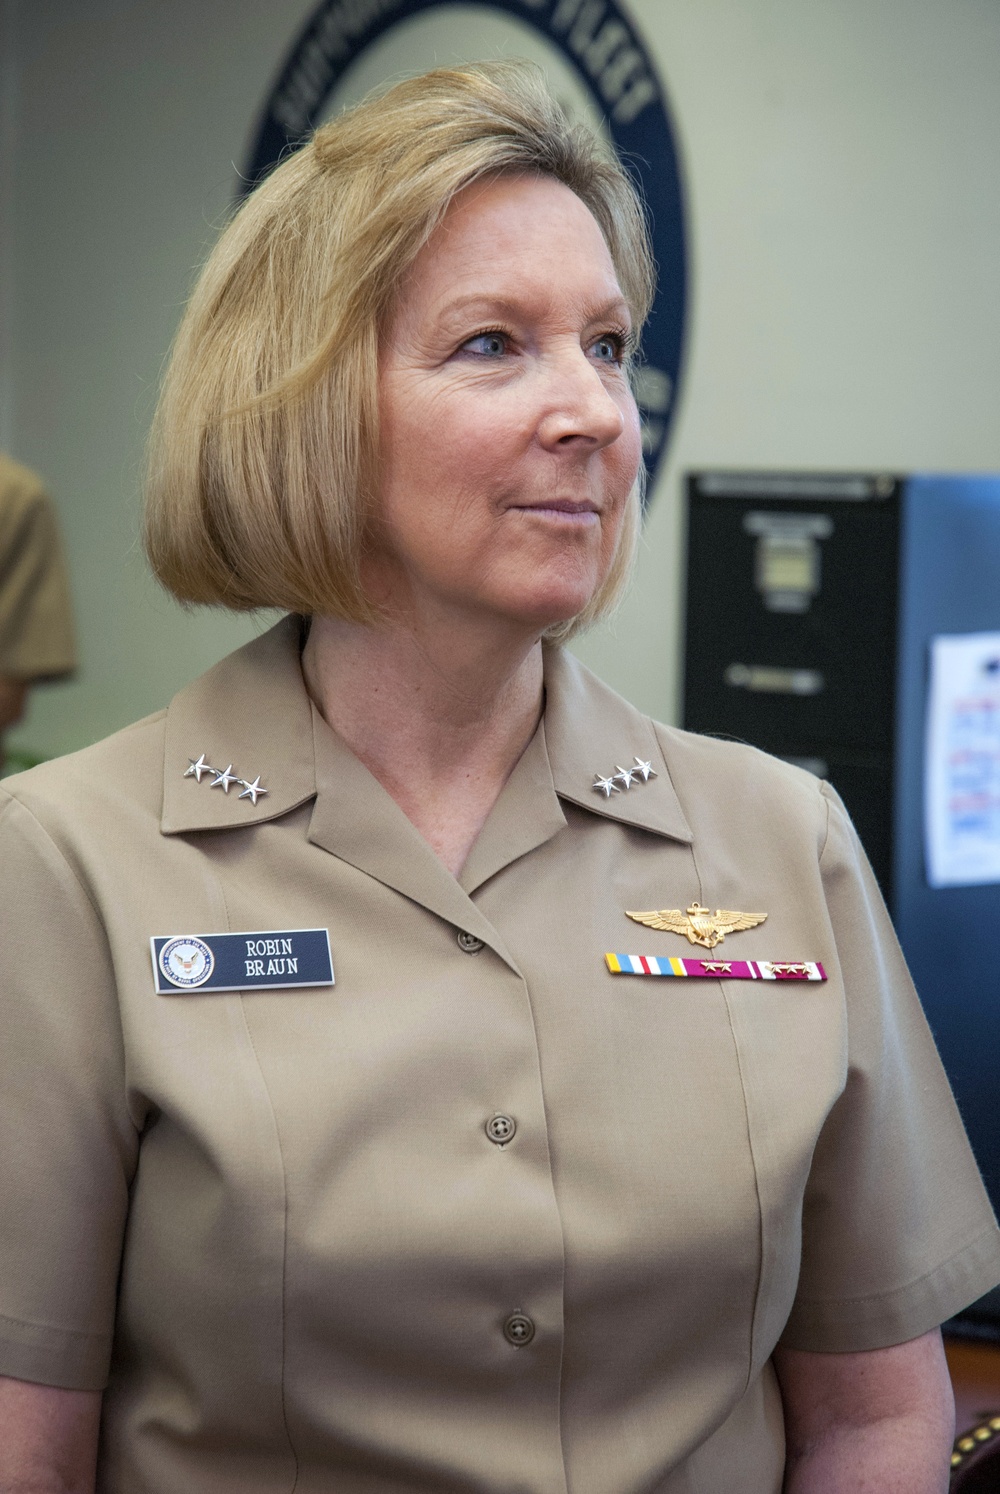 Vice Adm. Braun names changes ahead for smaller Navy Reserve Force